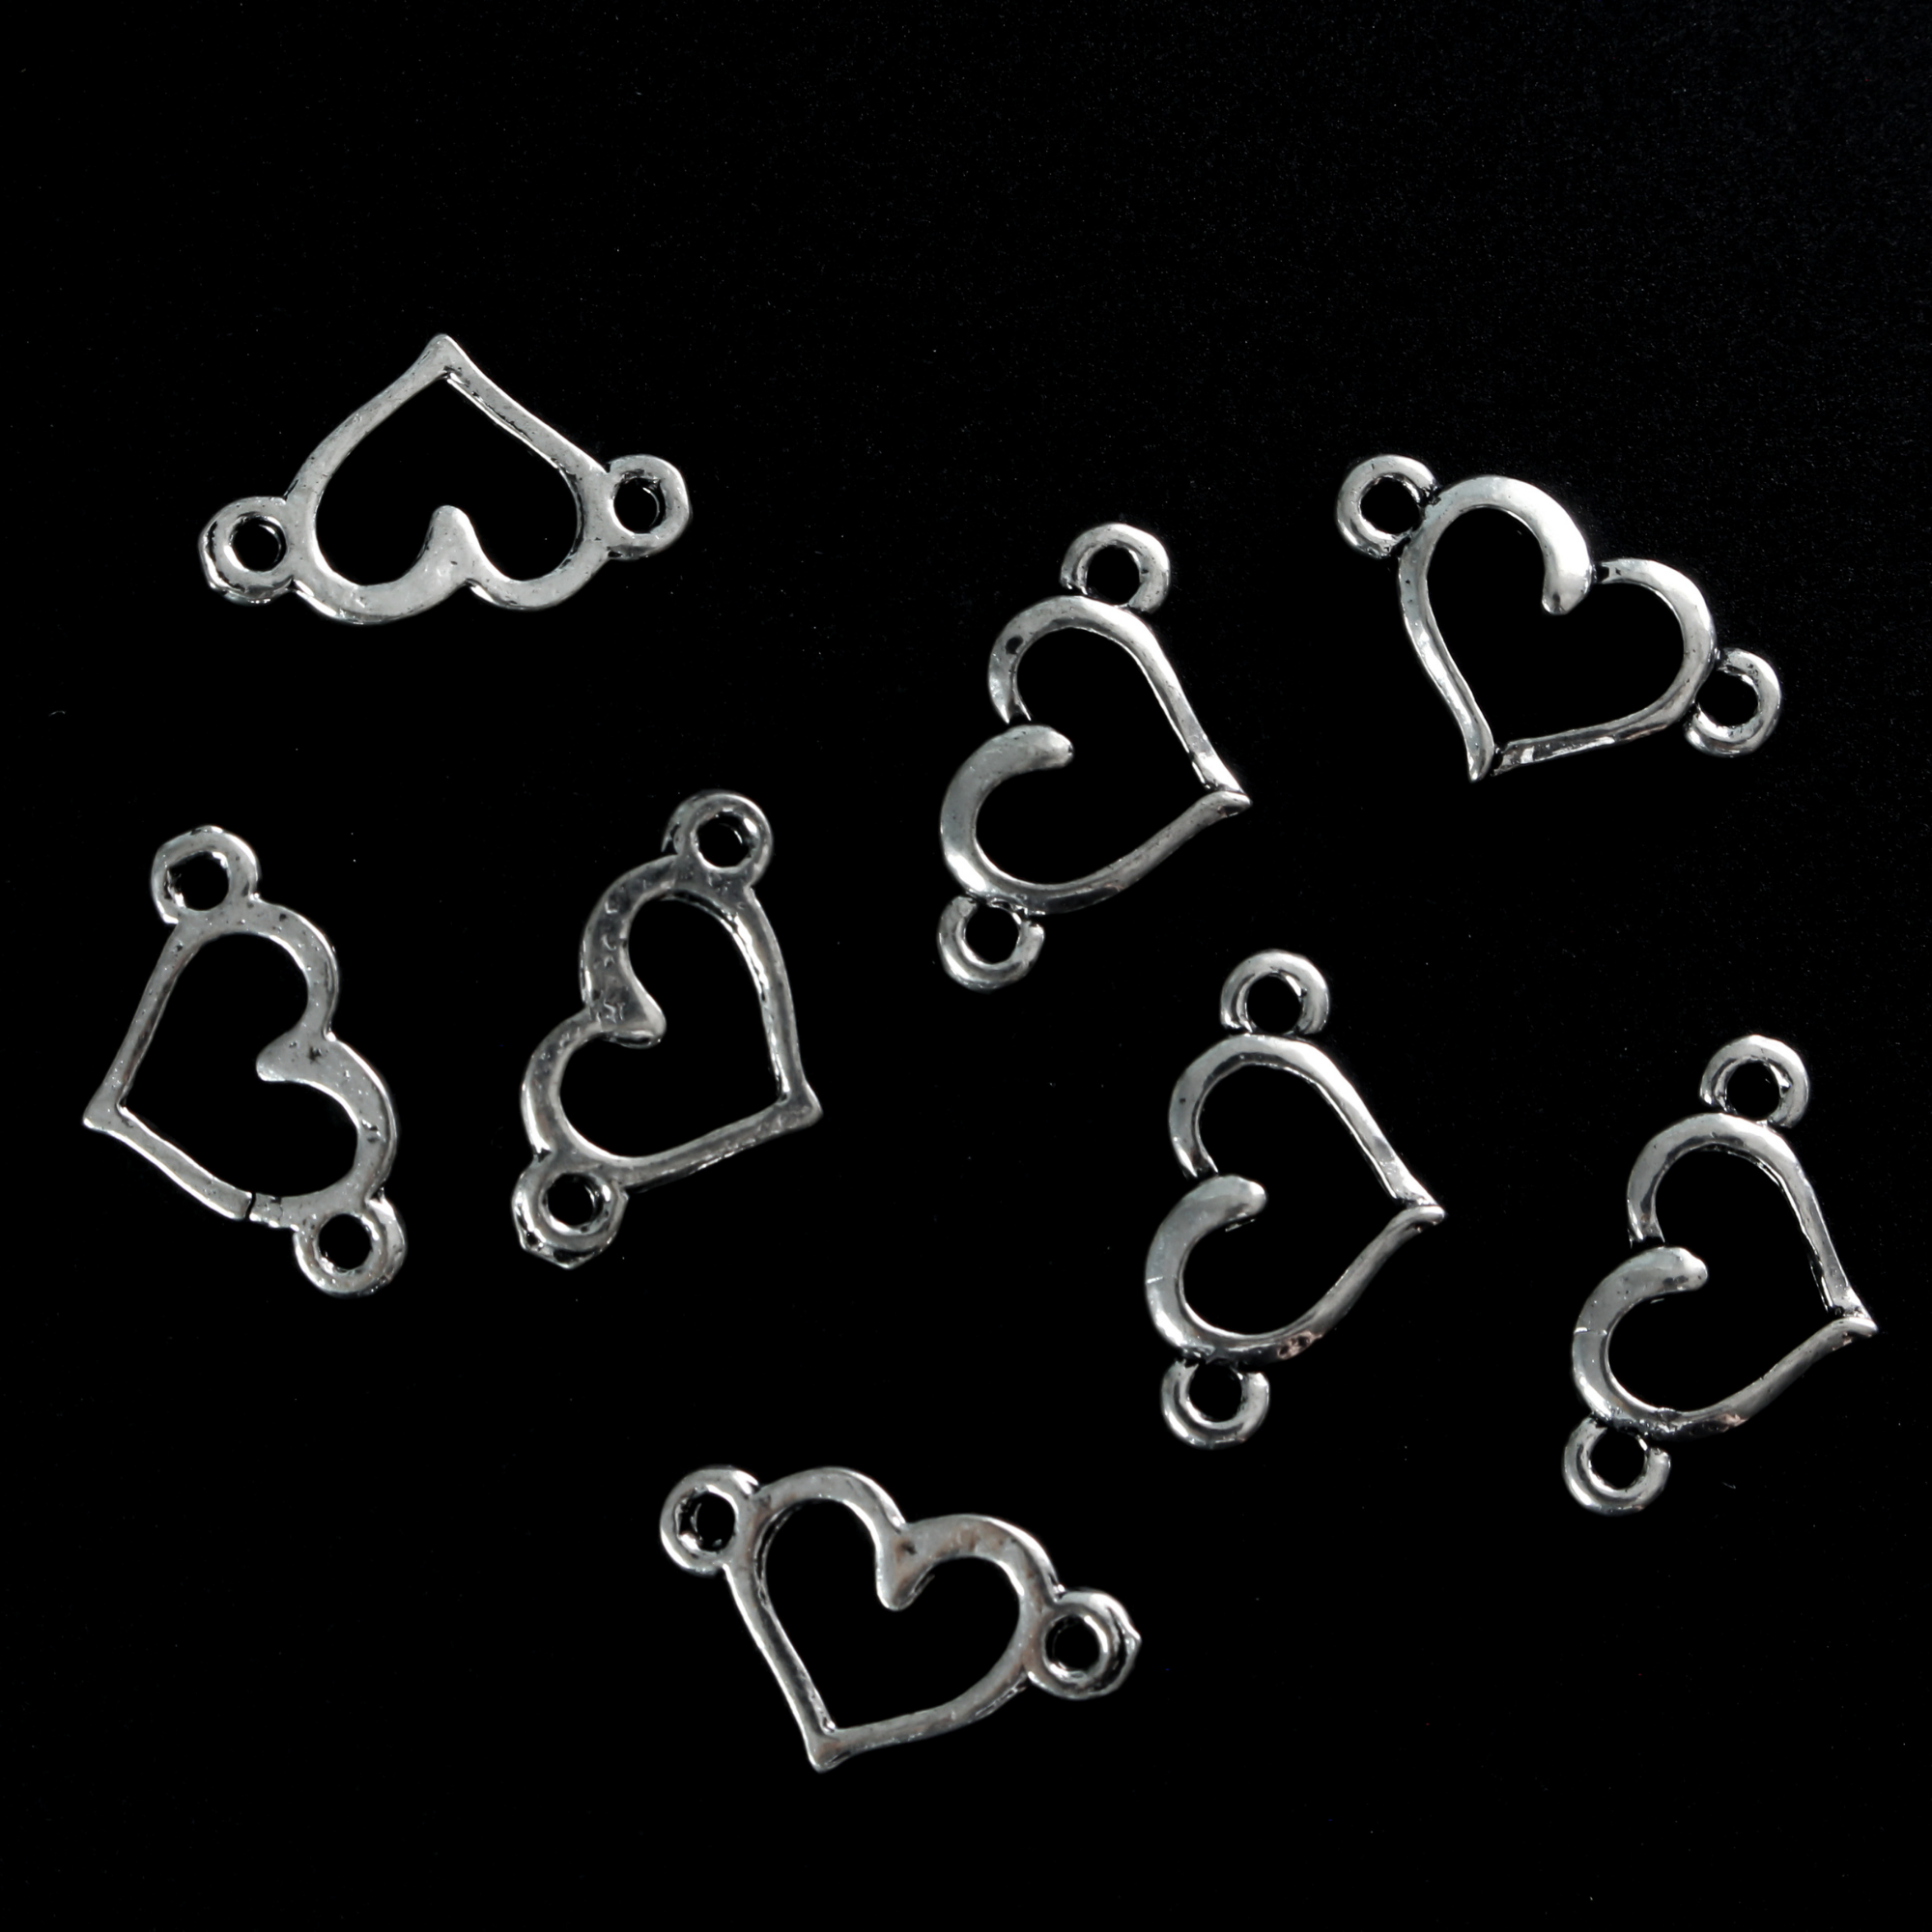 Hollow heart connector links that are sold in packs of 20 pieces.